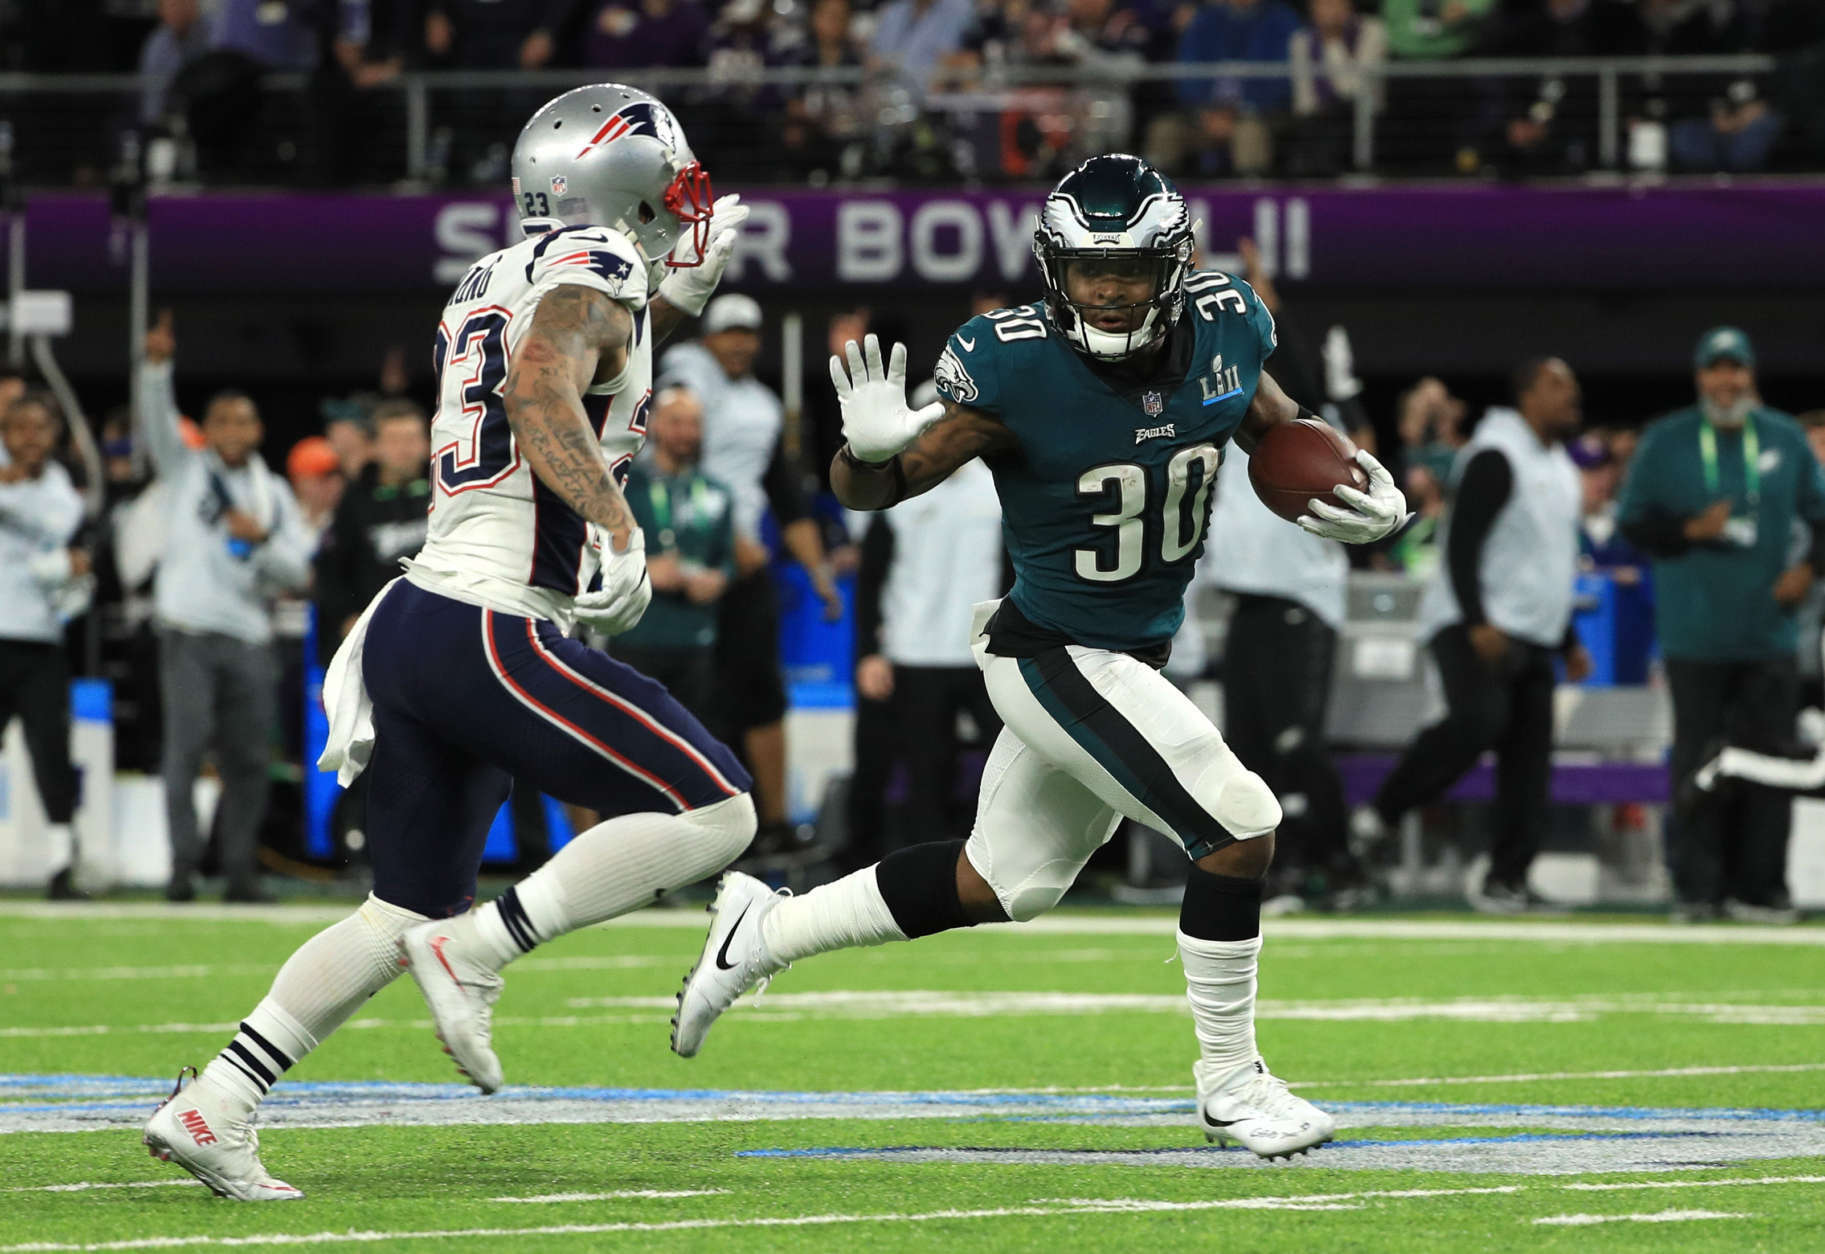 MINNEAPOLIS, MN - FEBRUARY 04:  Corey Clement #30 of the Philadelphia Eagles pushes off a tackle from Patrick Chung #23 of the New England Patriots during the second quarter in Super Bowl LII at U.S. Bank Stadium on February 4, 2018 in Minneapolis, Minnesota.  (Photo by Mike Ehrmann/Getty Images)